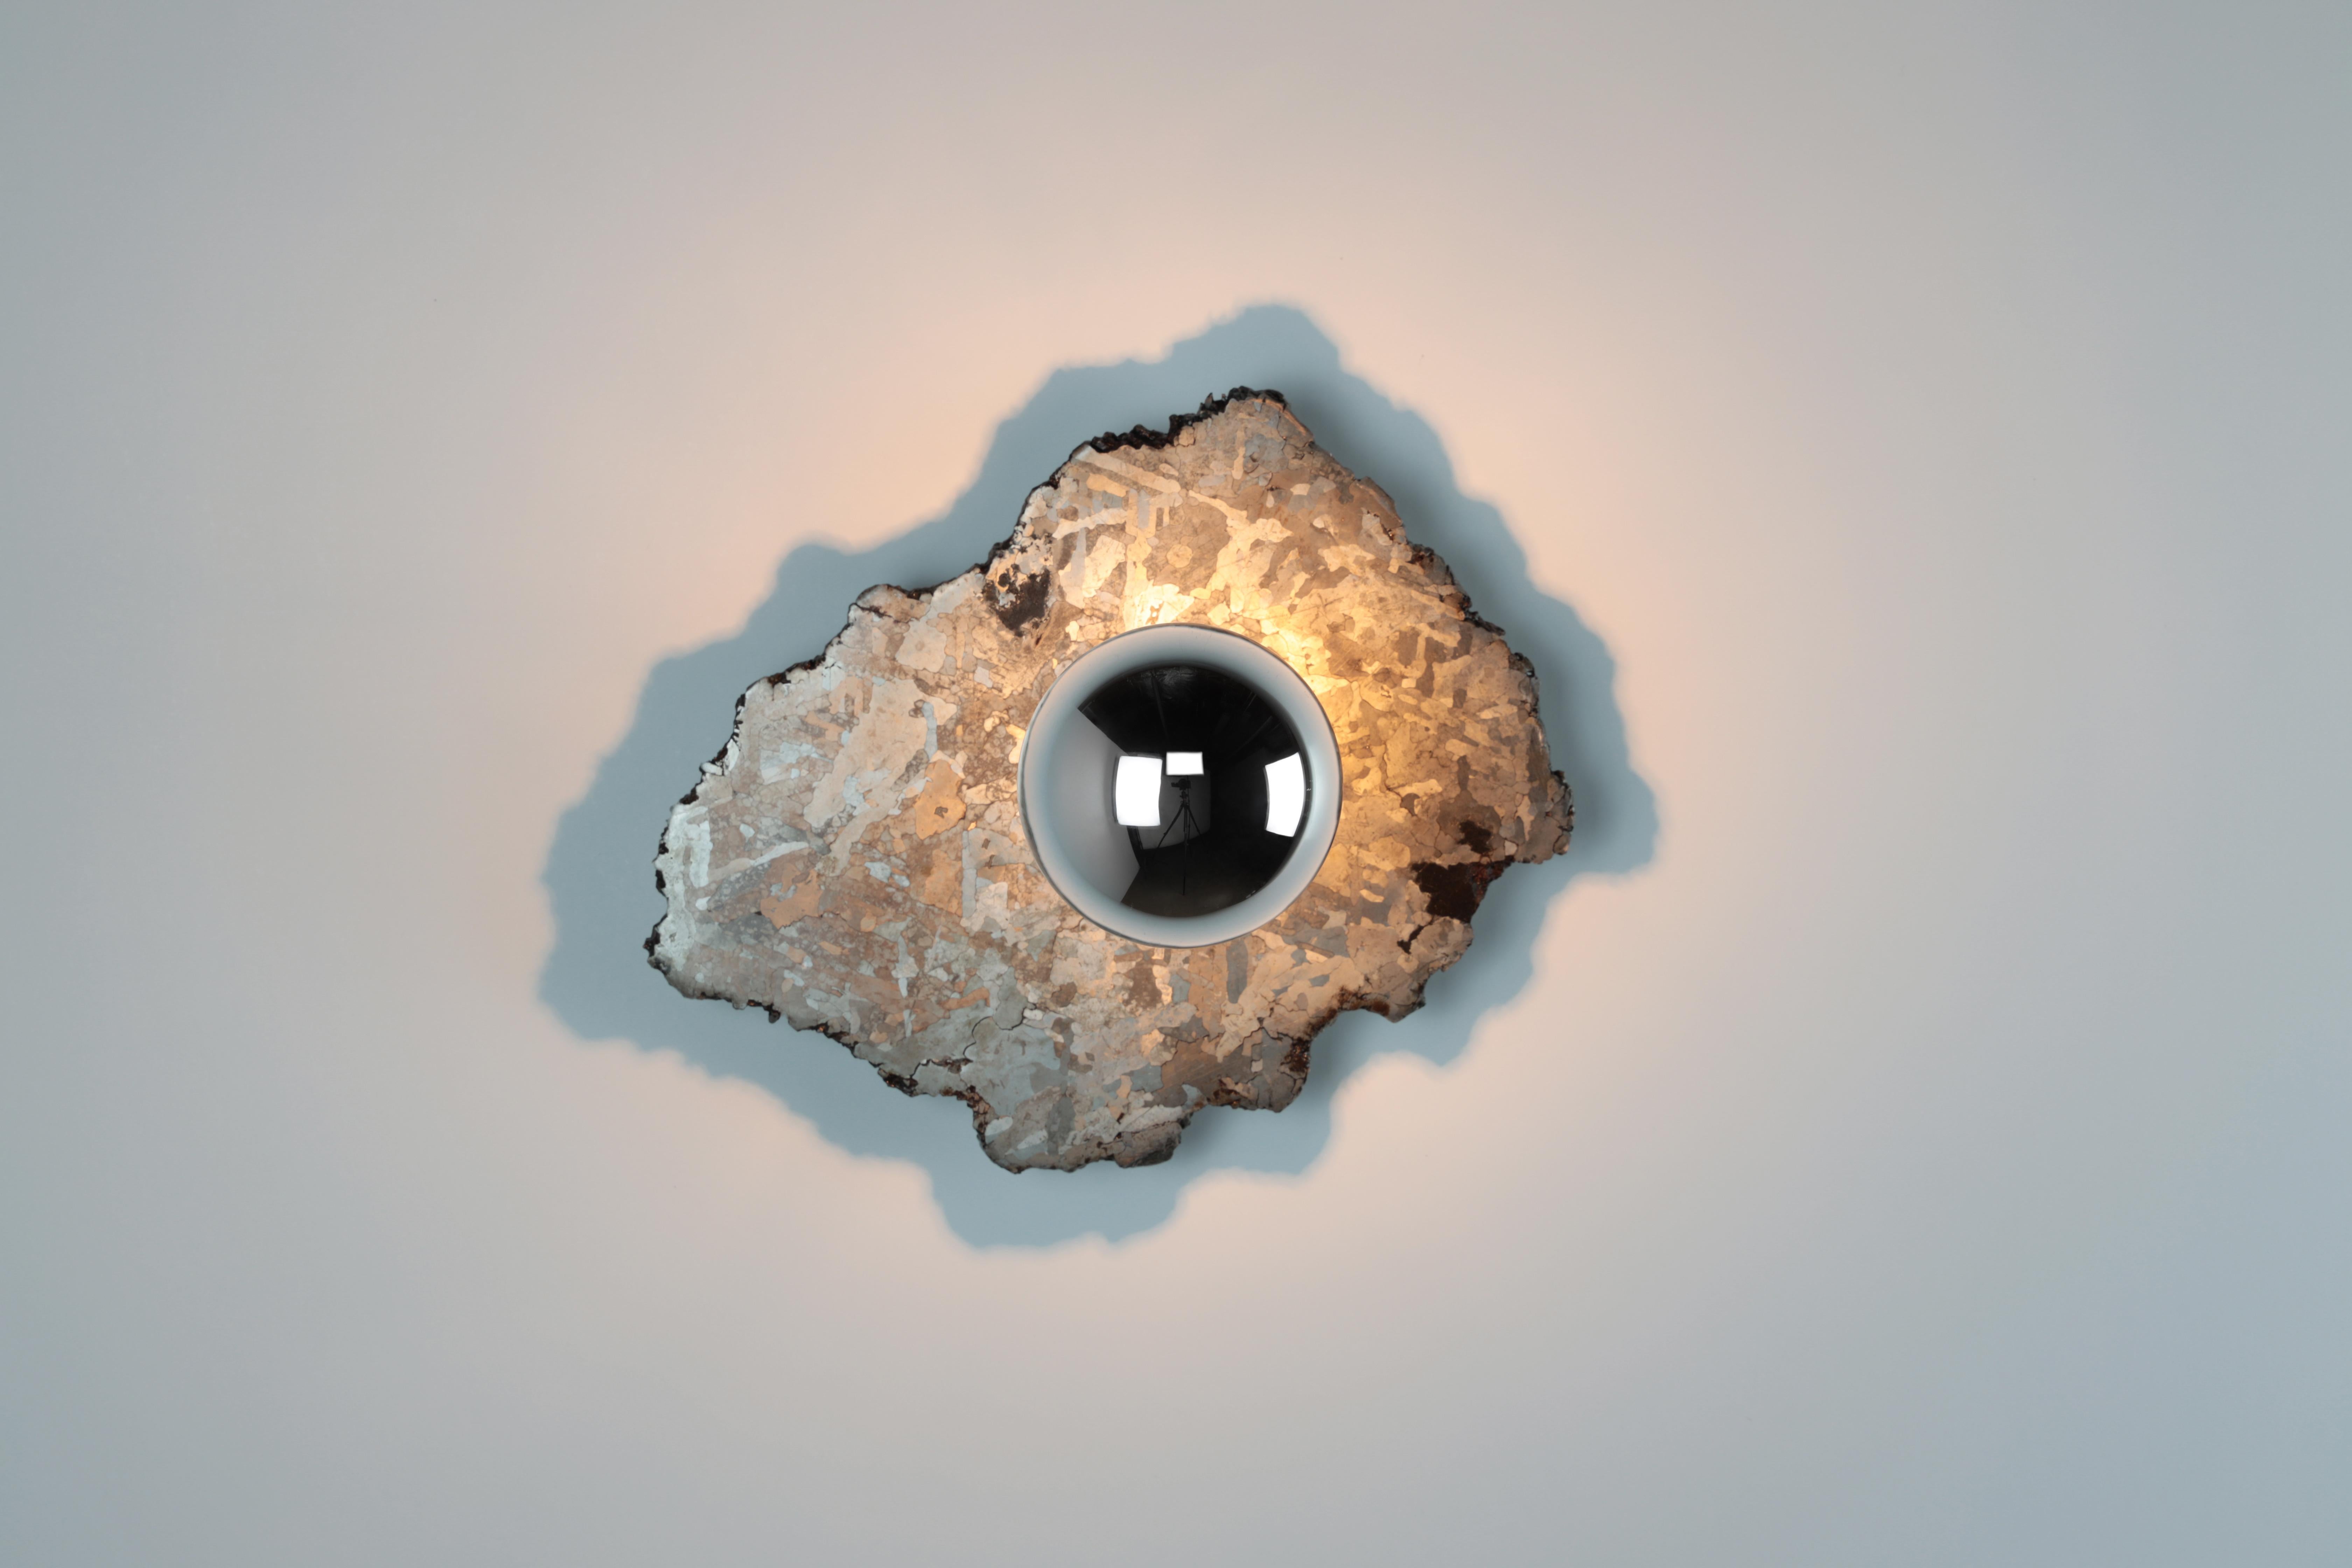 American Meteorite Sconce 'A' with Half Chromed Bulbs, 2021 by Christopher Kreiling